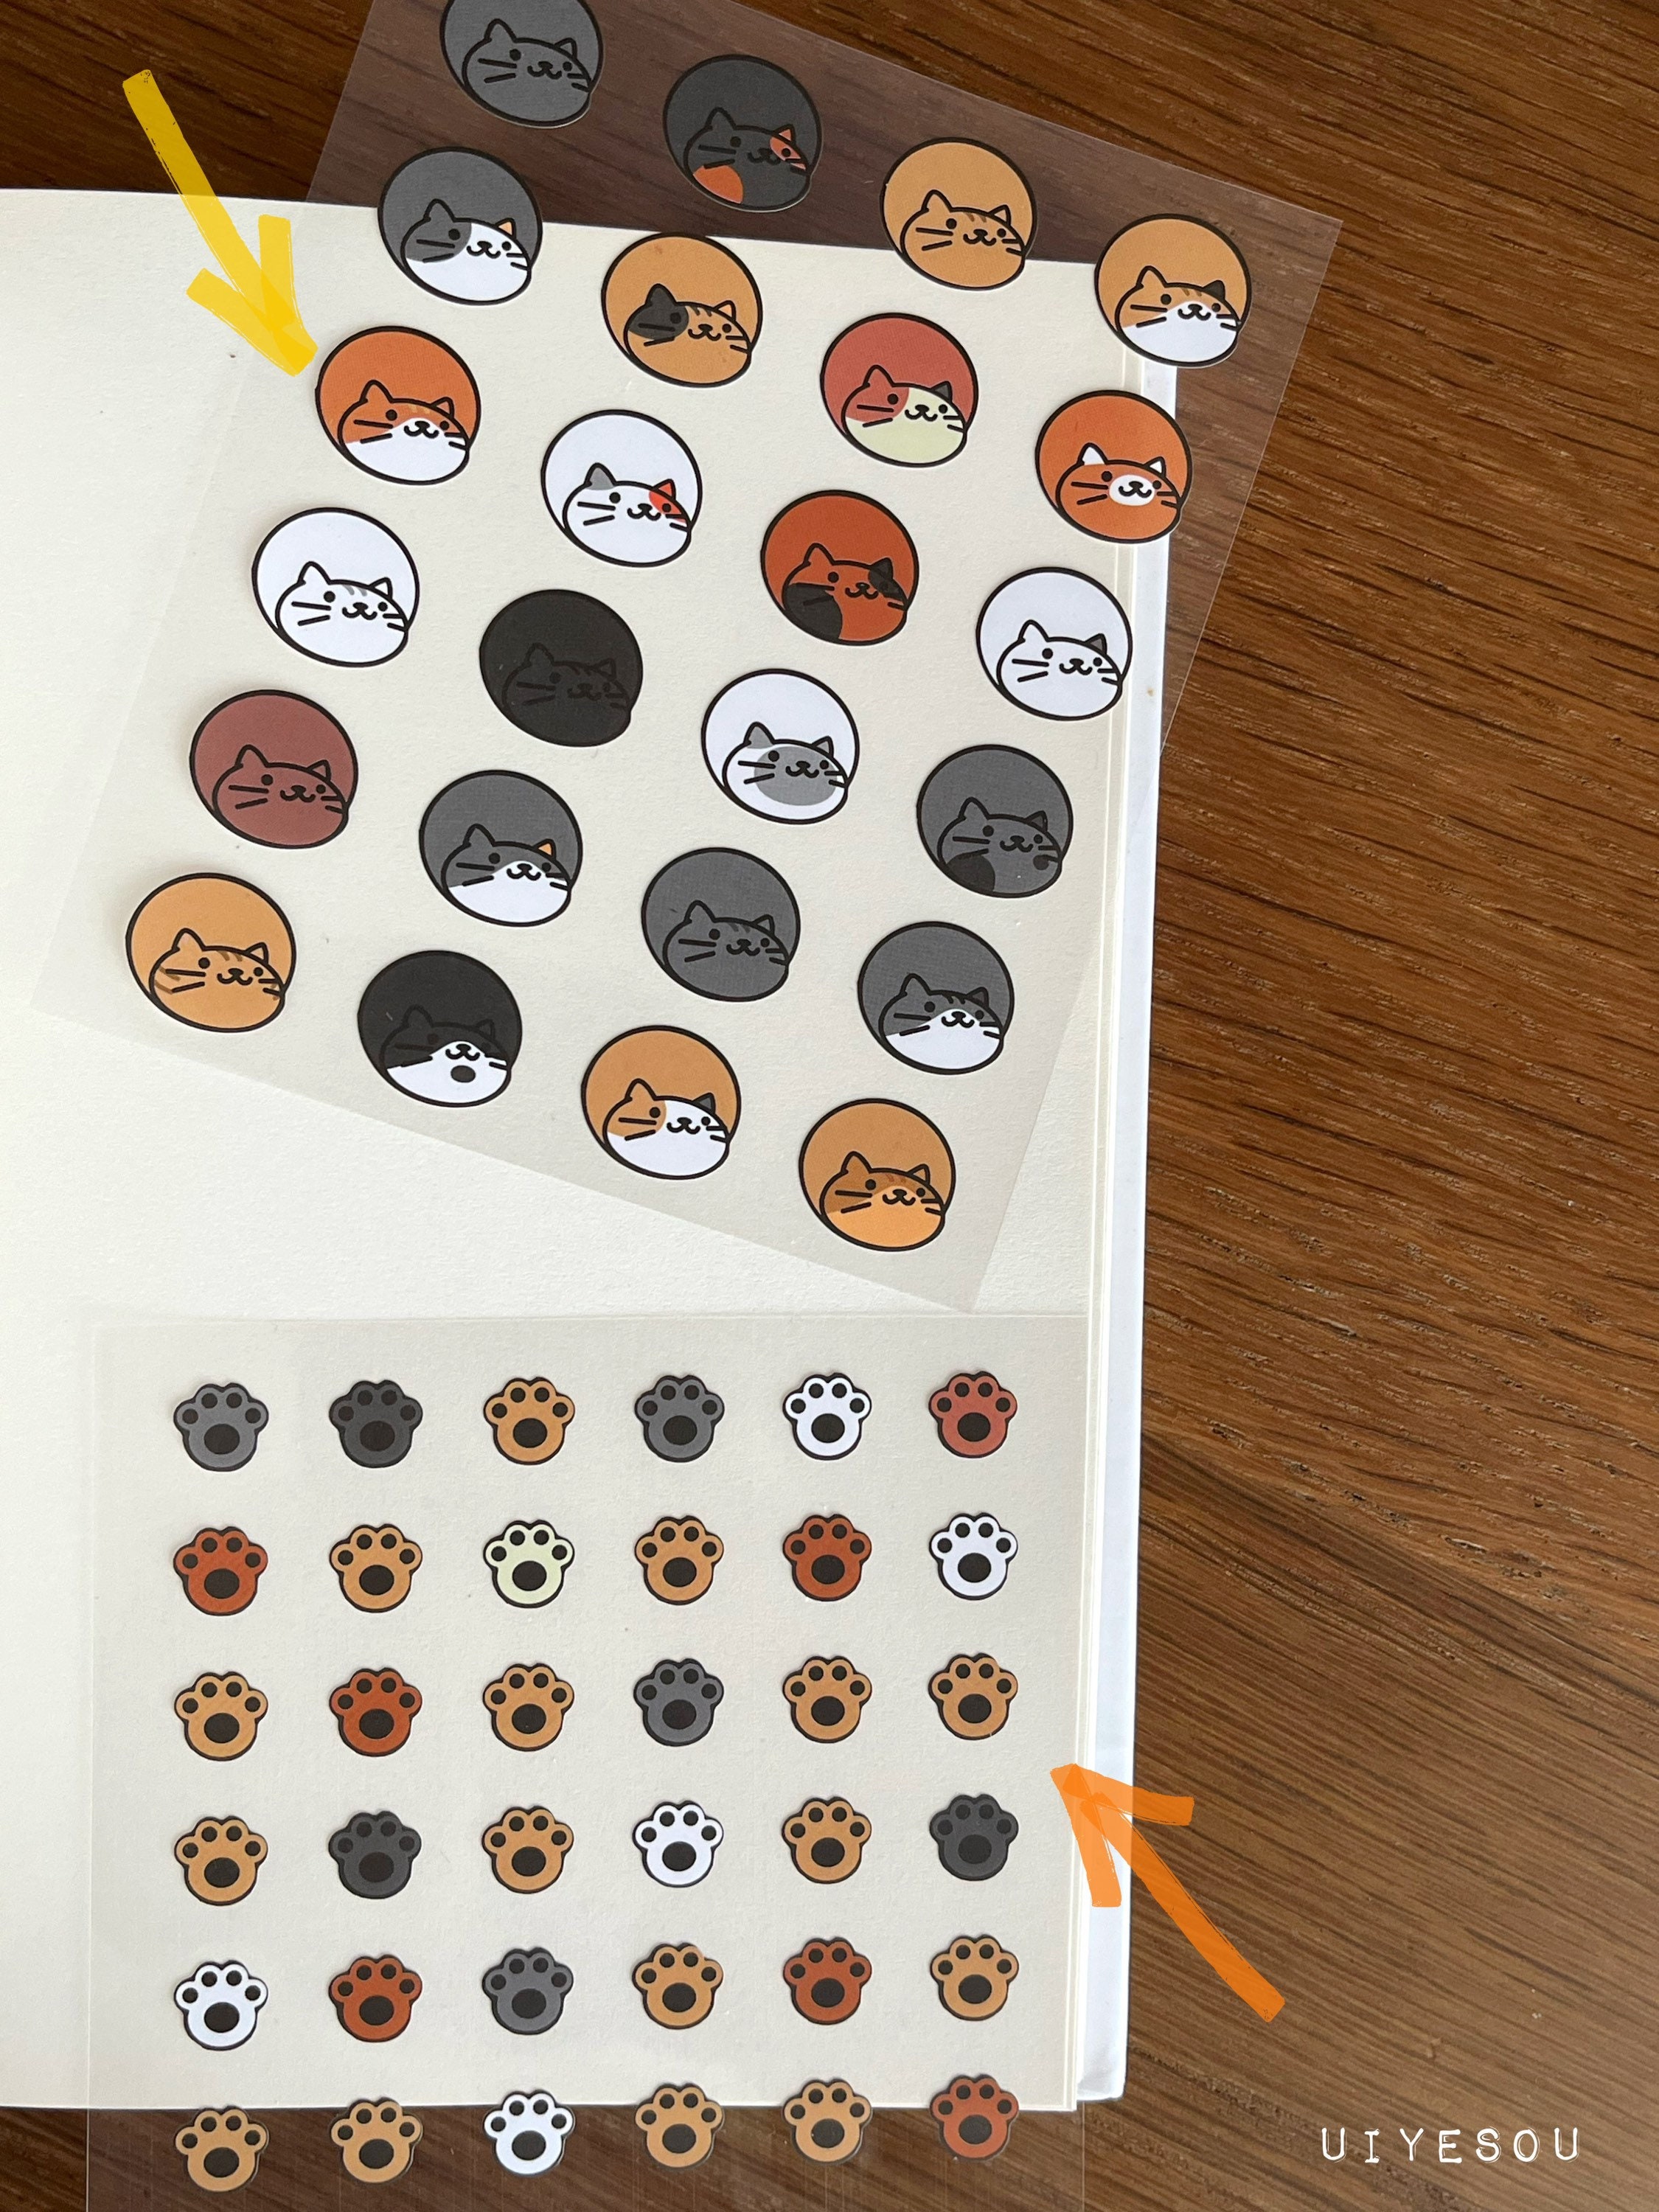 Pet Stickers holiday: 20pcs Kawaii Stickers for Journaling Cute